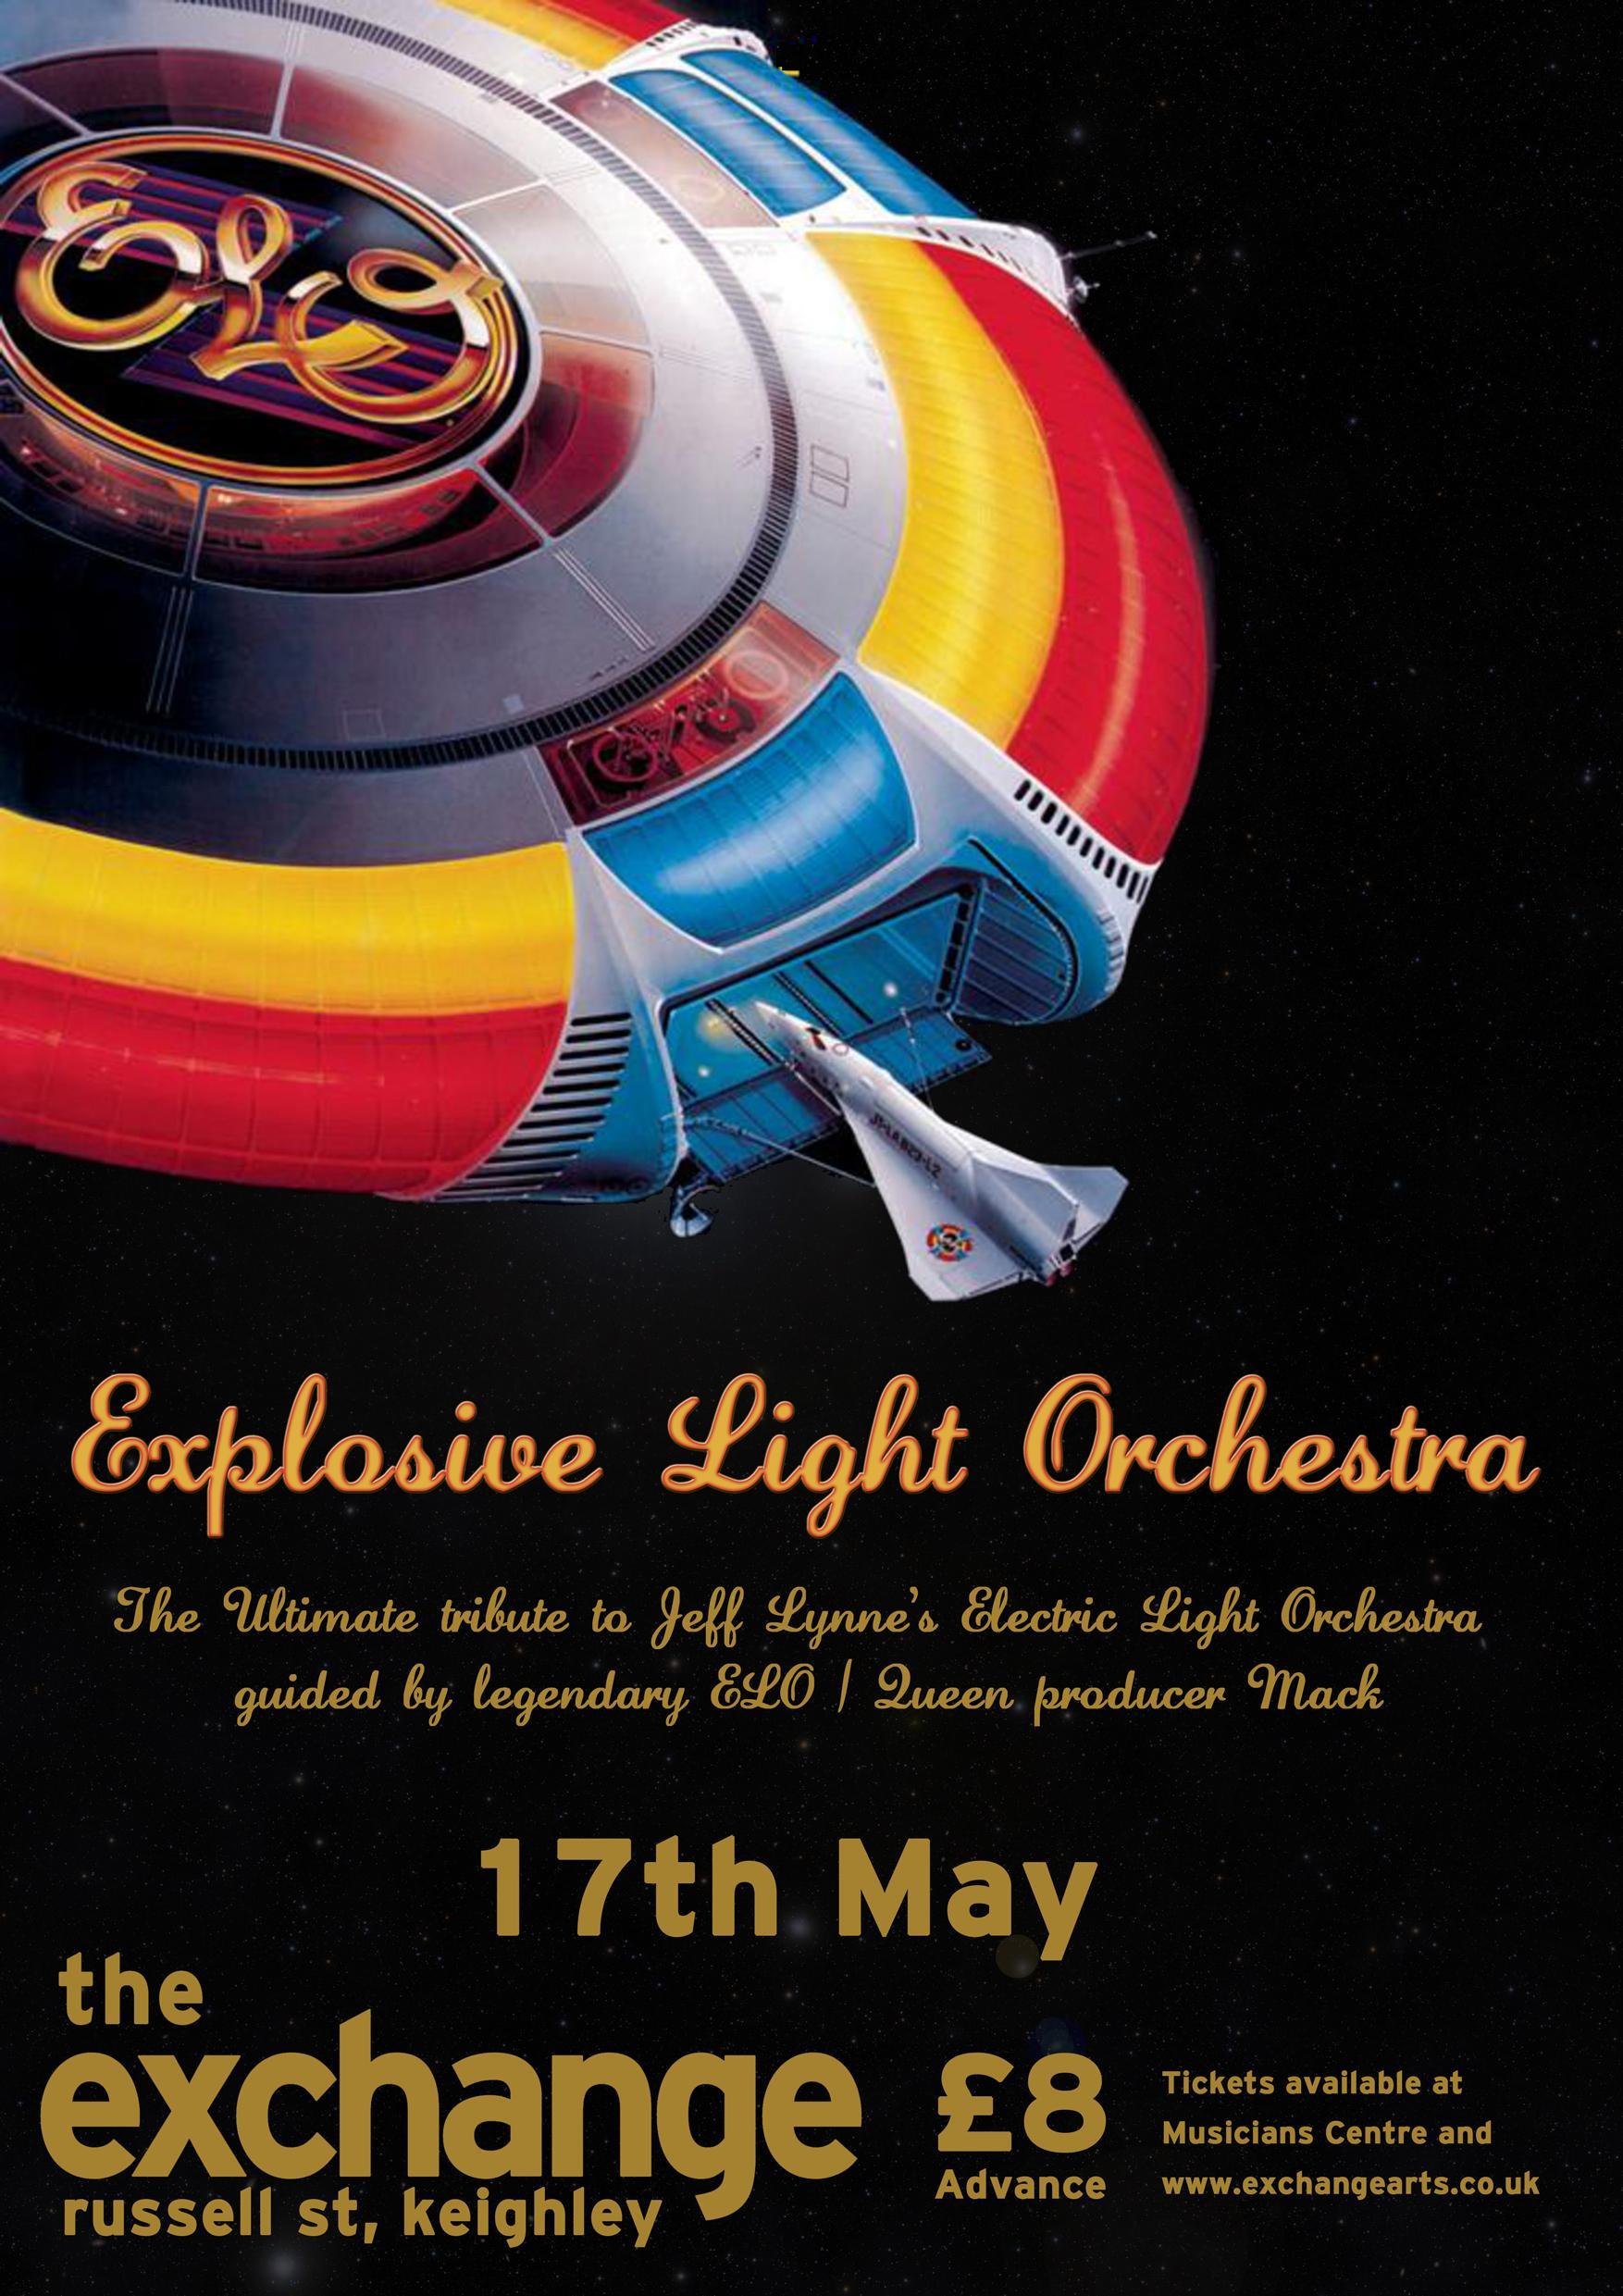 Electric Light Orchestra Wallpaper